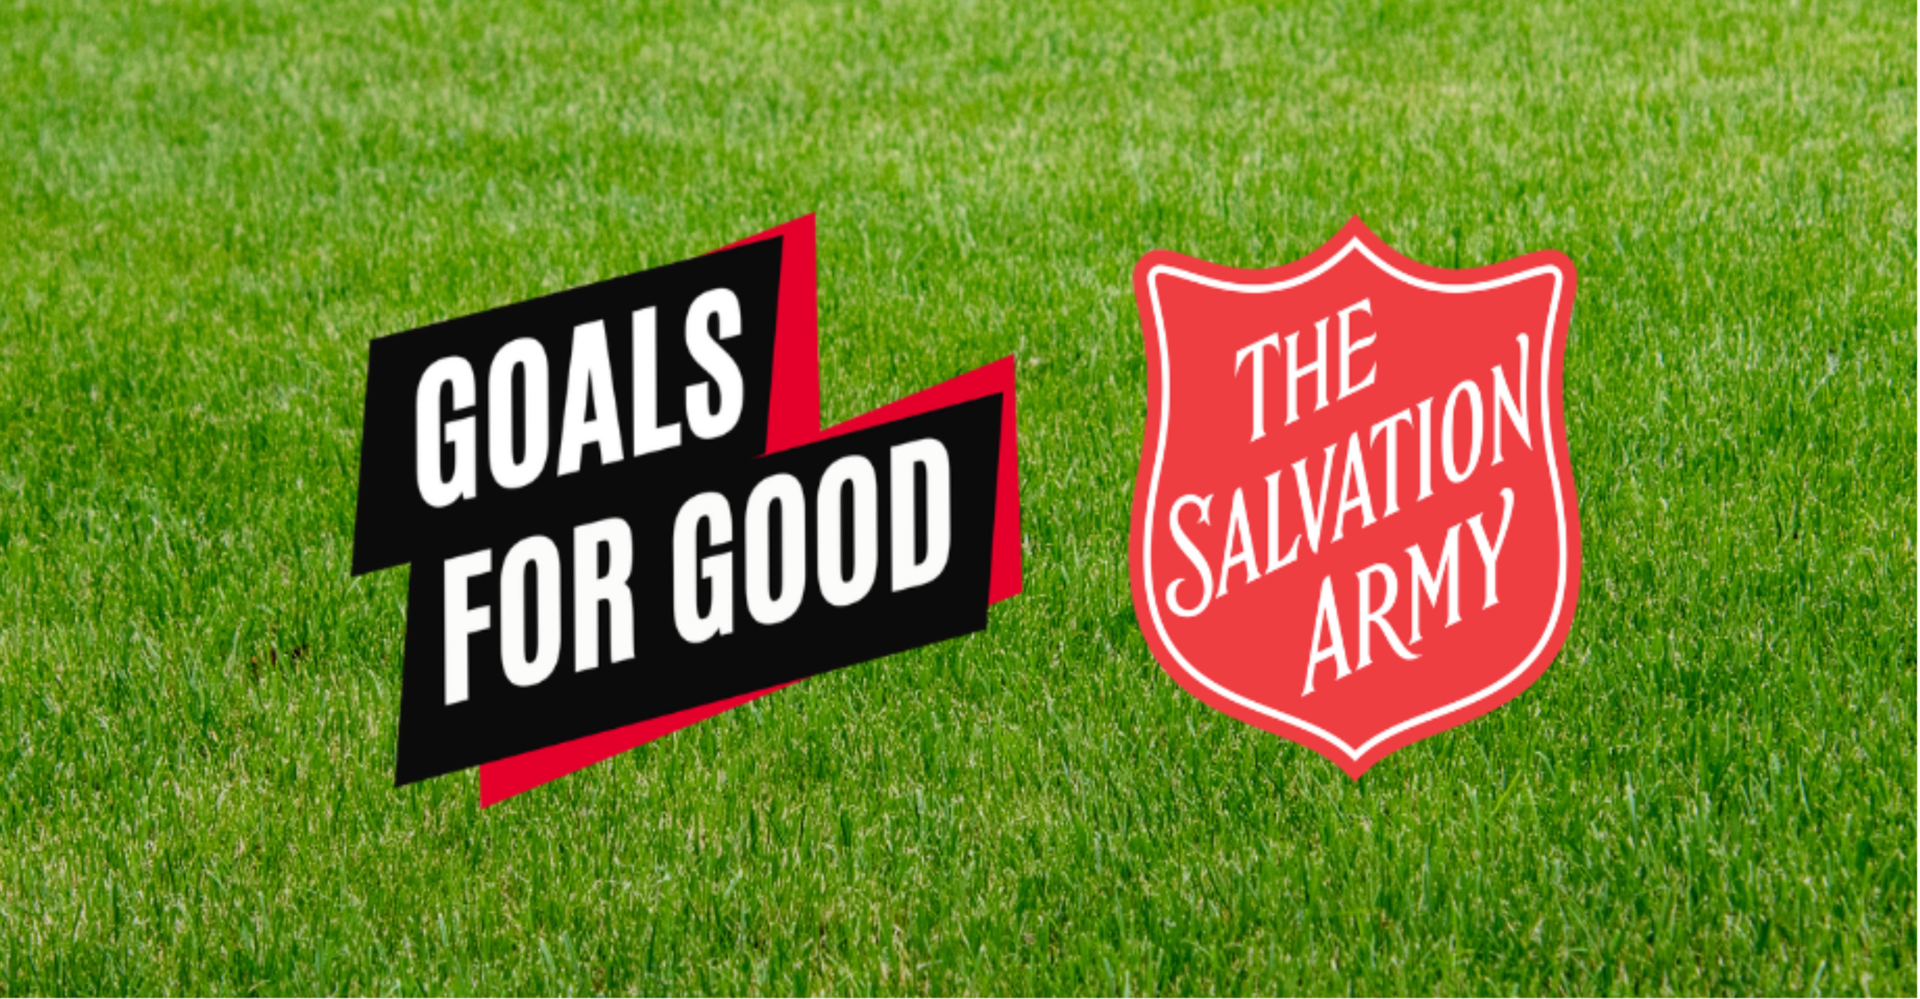 Goals For Good spelled out on top on a football pitch alongside the Salvation Army shield